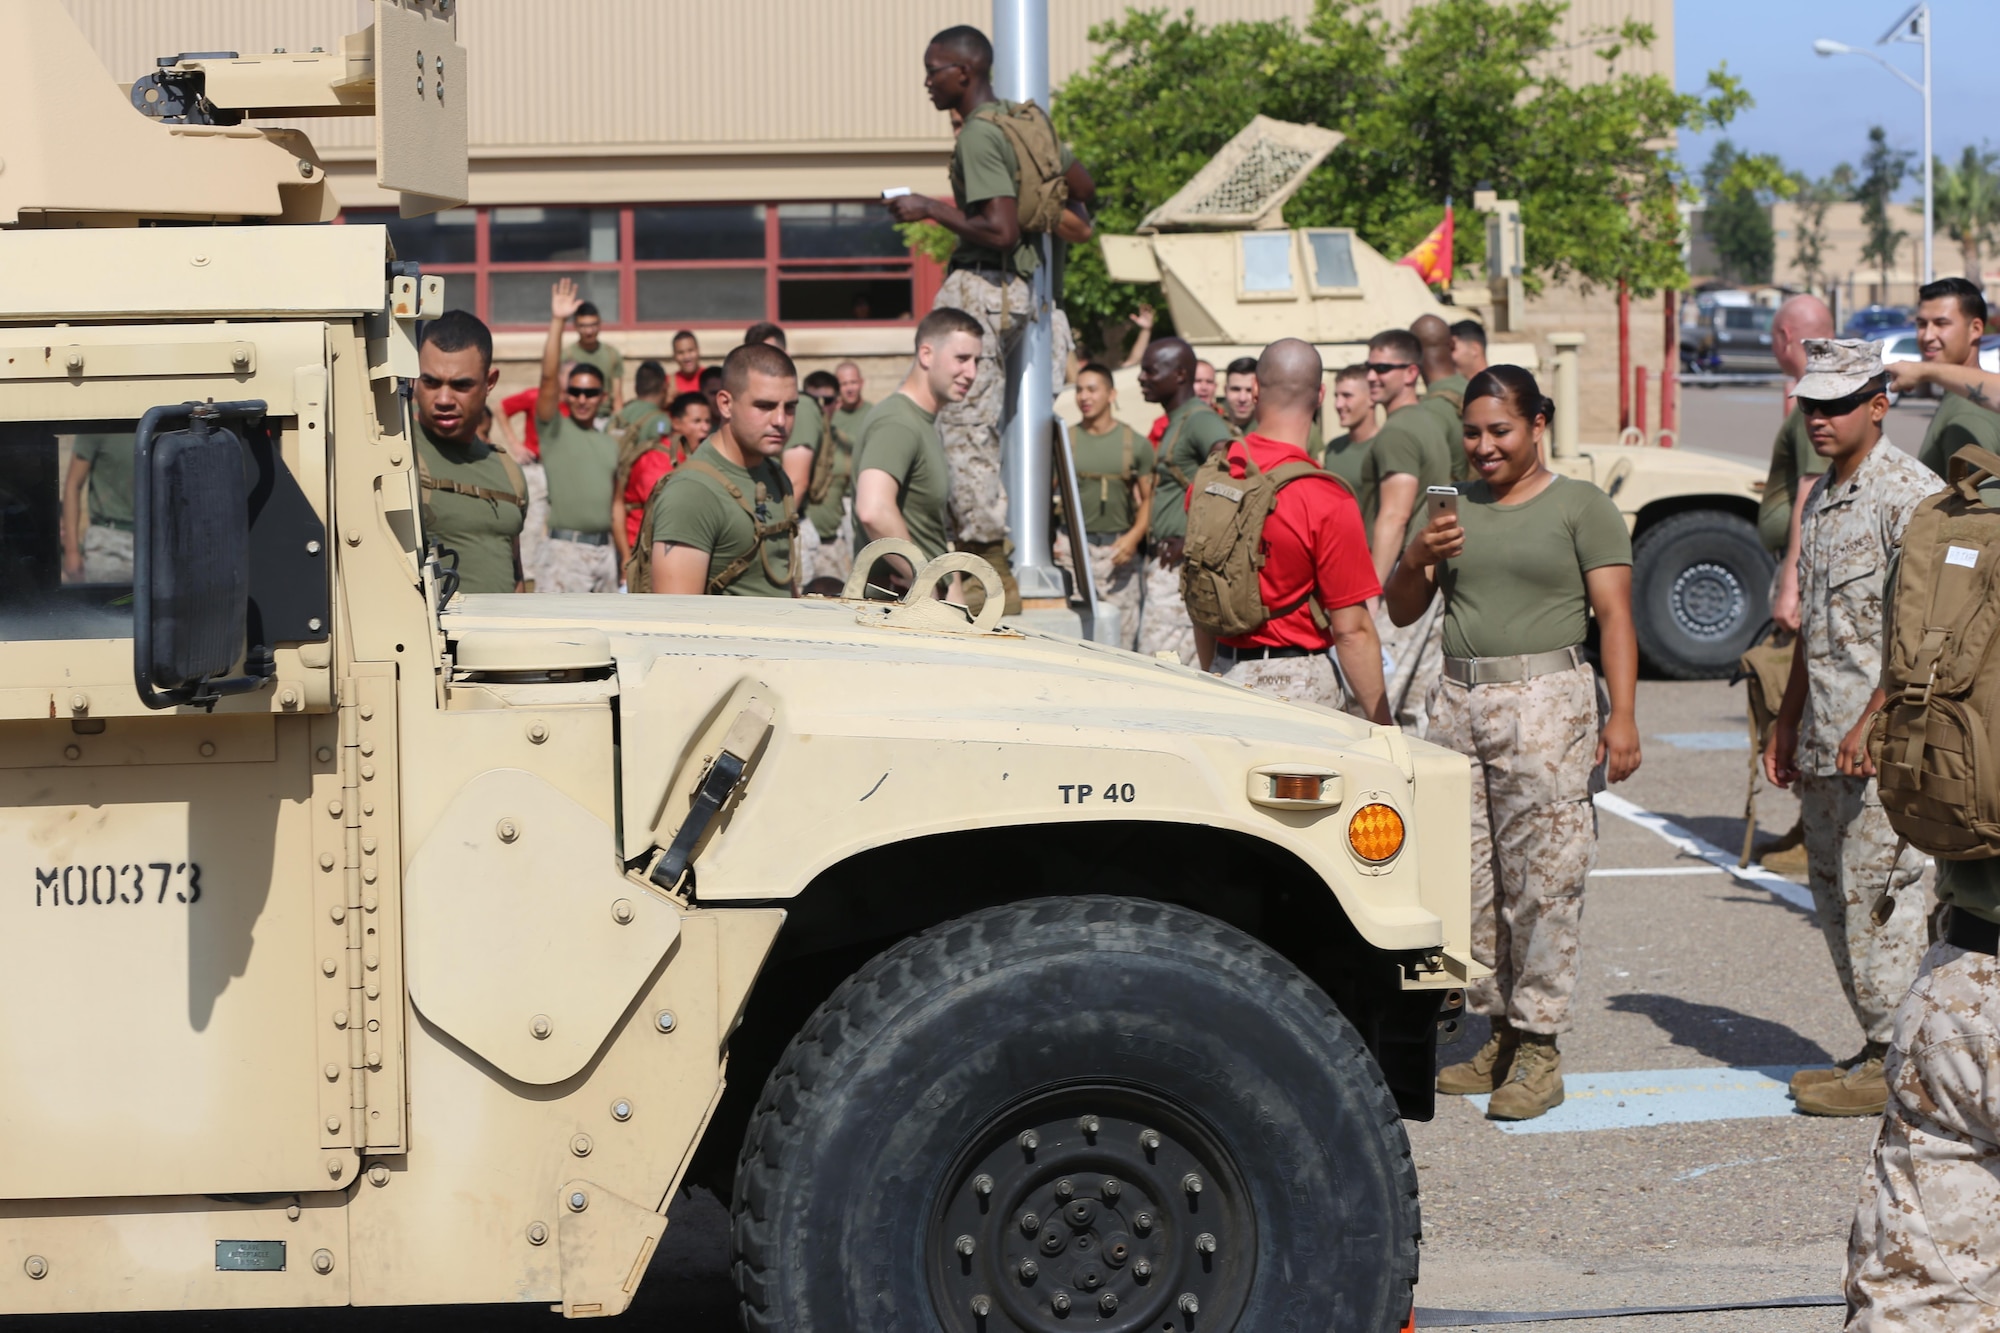 Marines with Marine Wing Support Squadron (MWSS) 373 wait for the results of the Humvee-pull competition during the MWSS-373 Field Meet aboard Marine Corps Air Station Miramar, California, June 26. The field meet commemorates the birthday of the unit. 